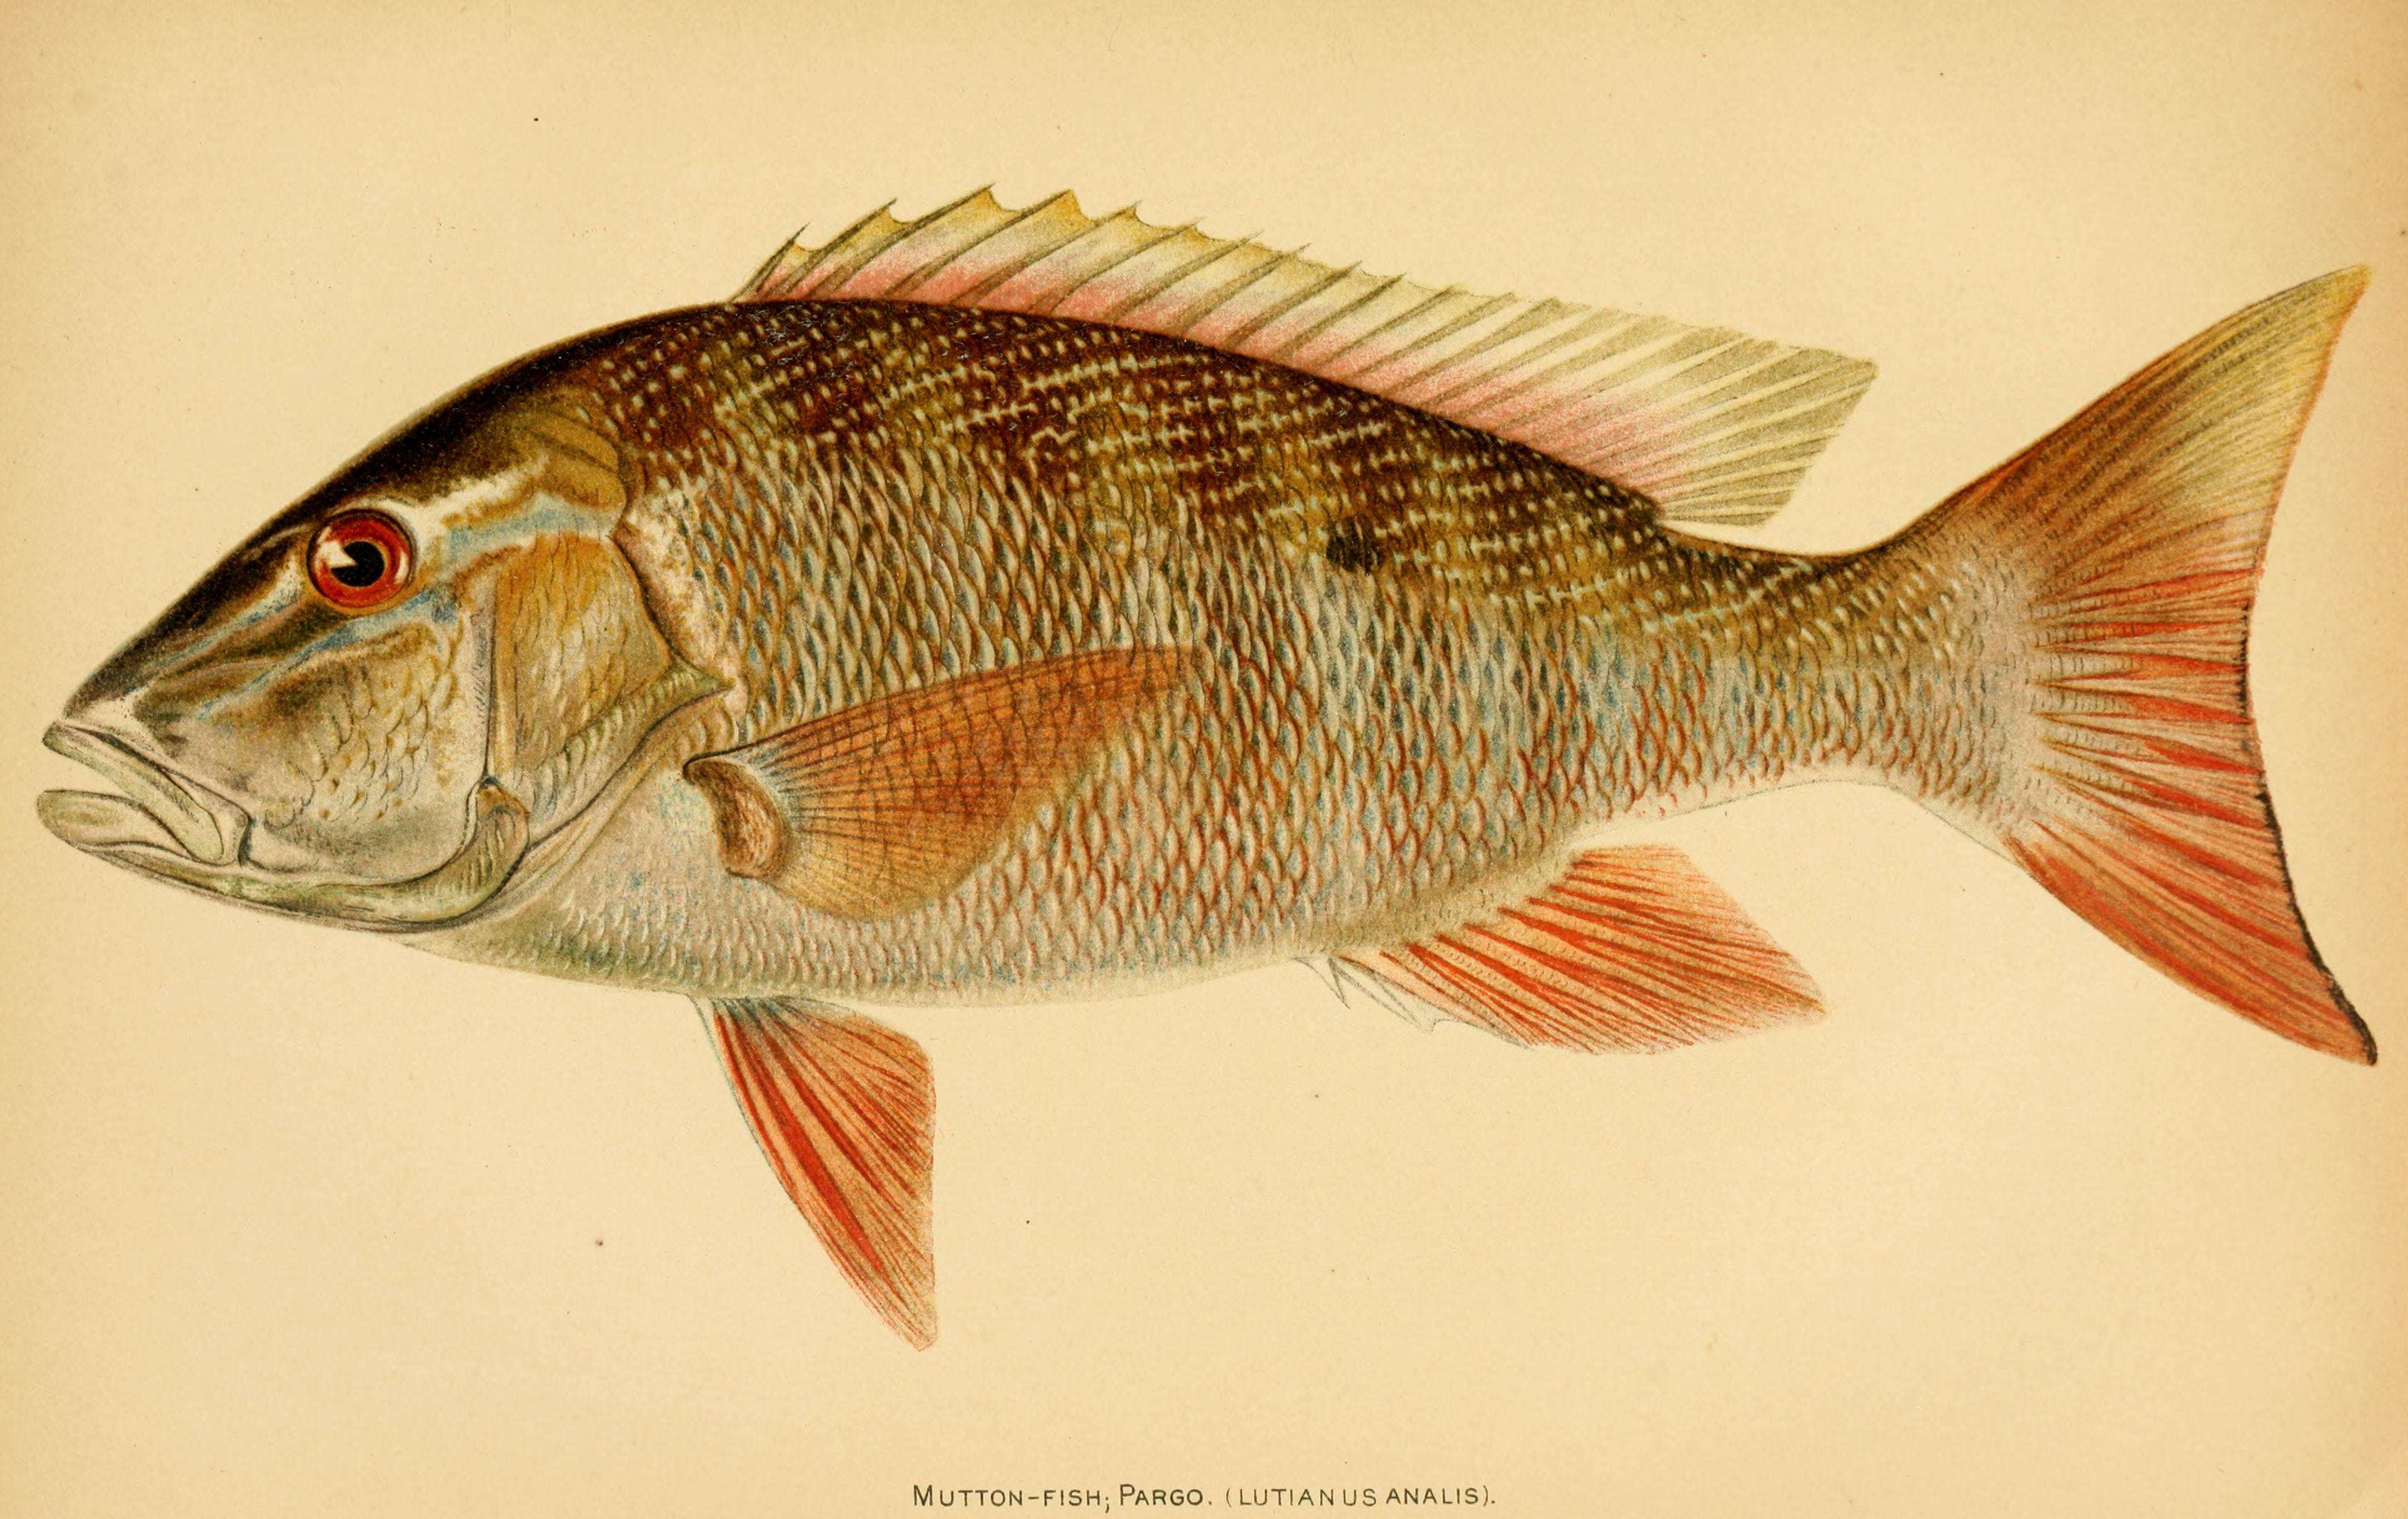 Image of Mutton Snapper